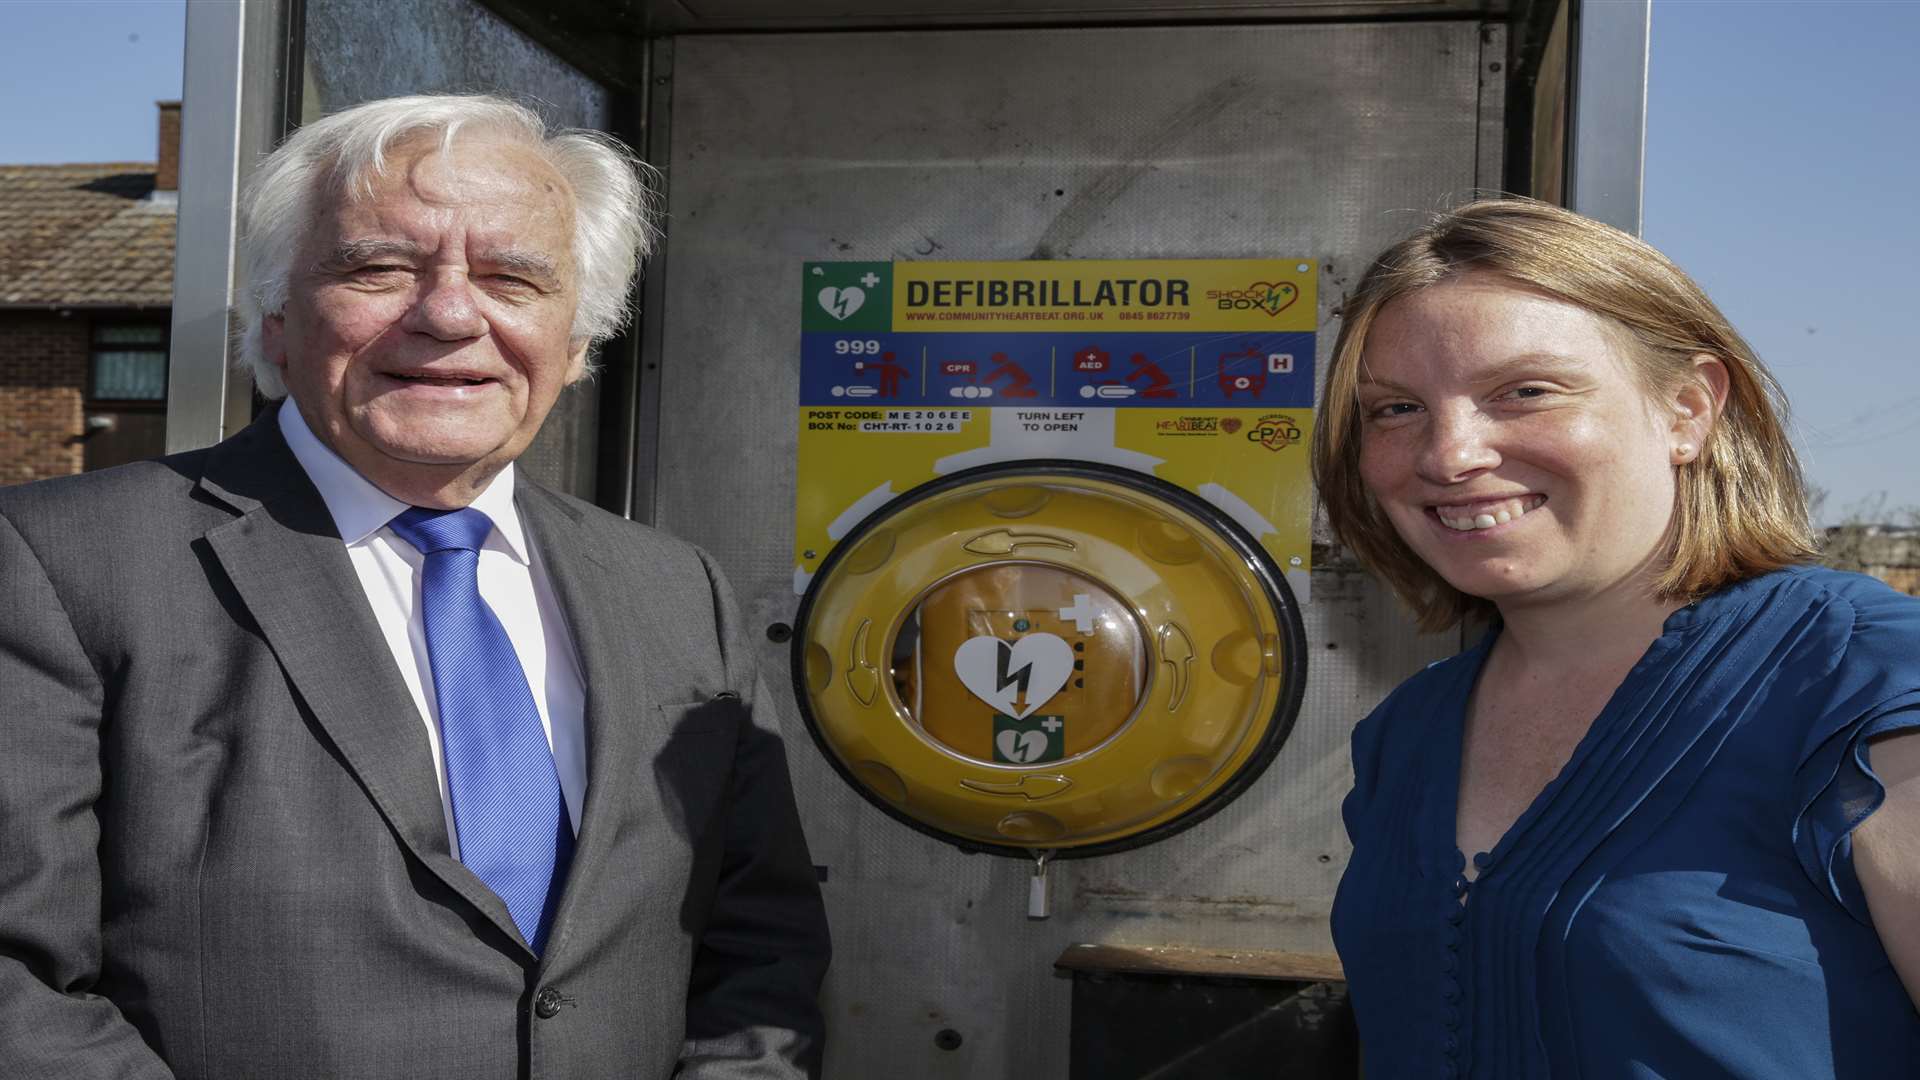 Peter Homeward county councillor and Tracey Crouch MP unveiling a public defibrillator situated in a phone box for emergencies